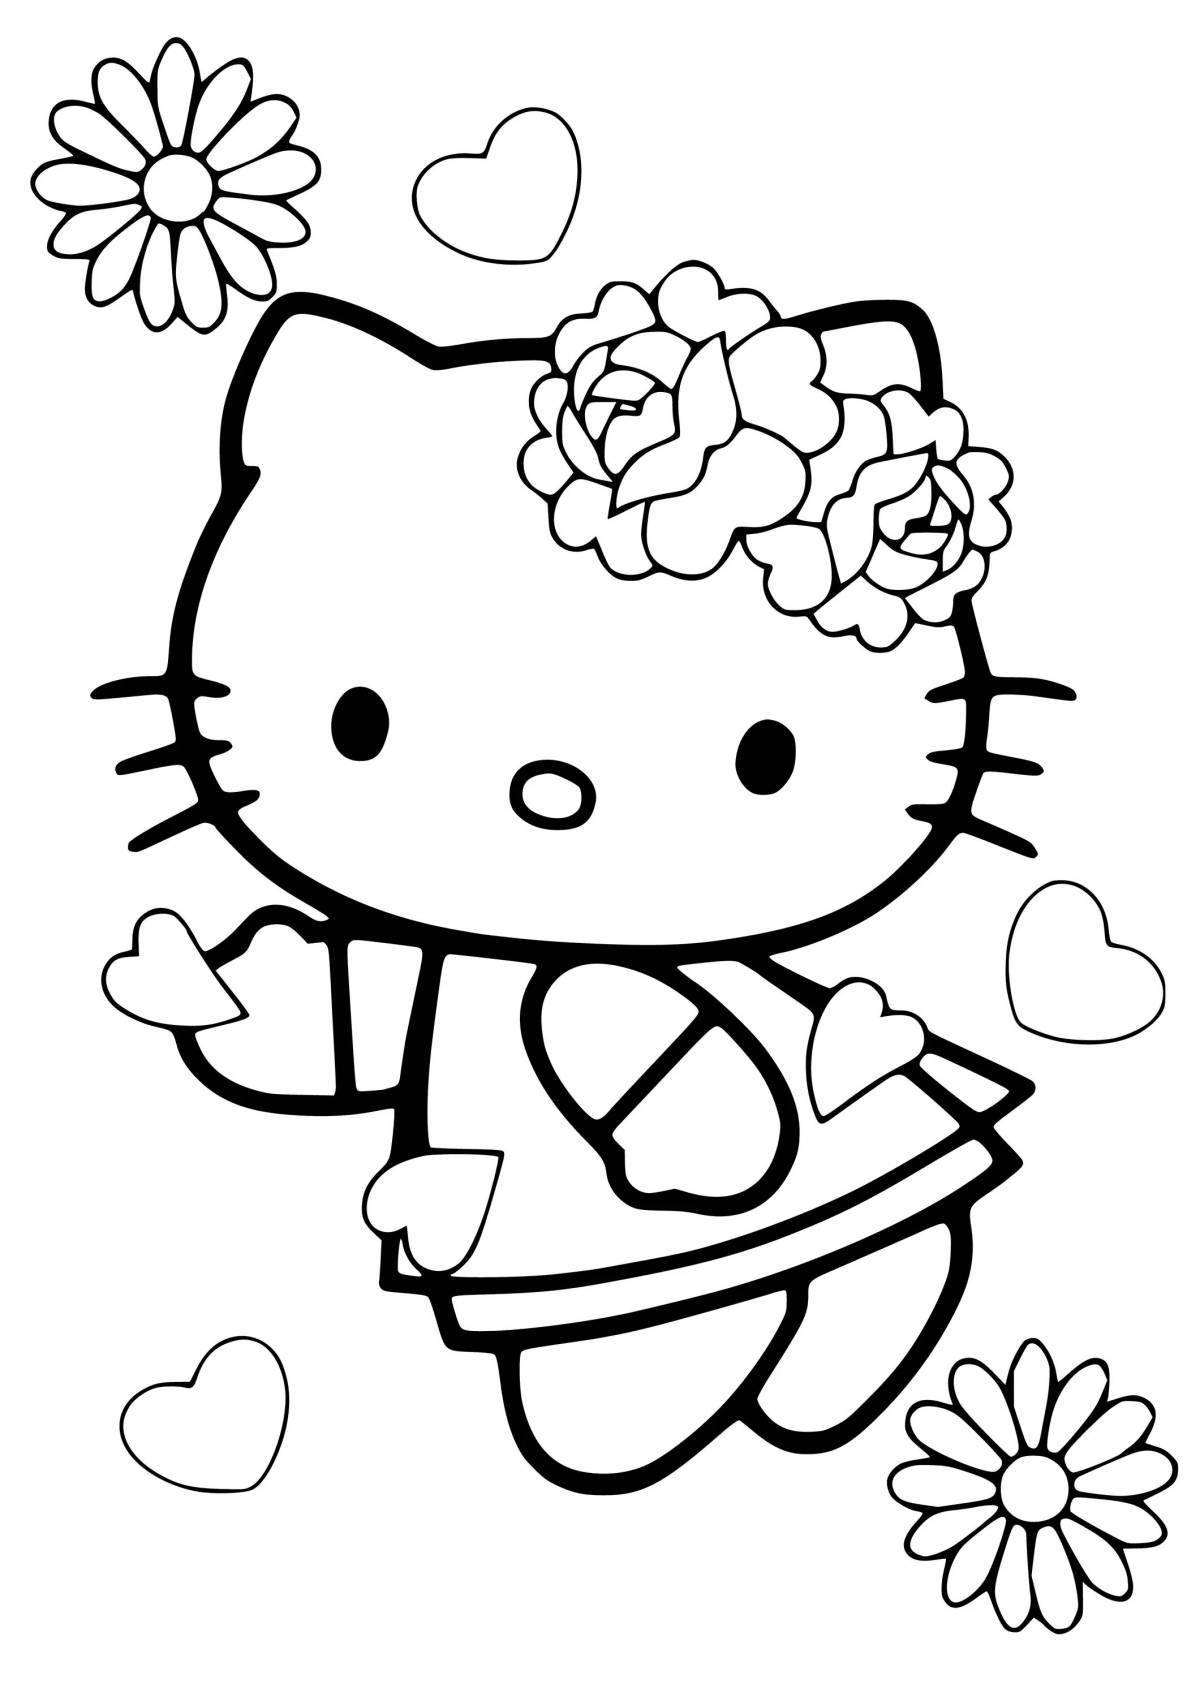 Milady's fancy coloring from hello kitty